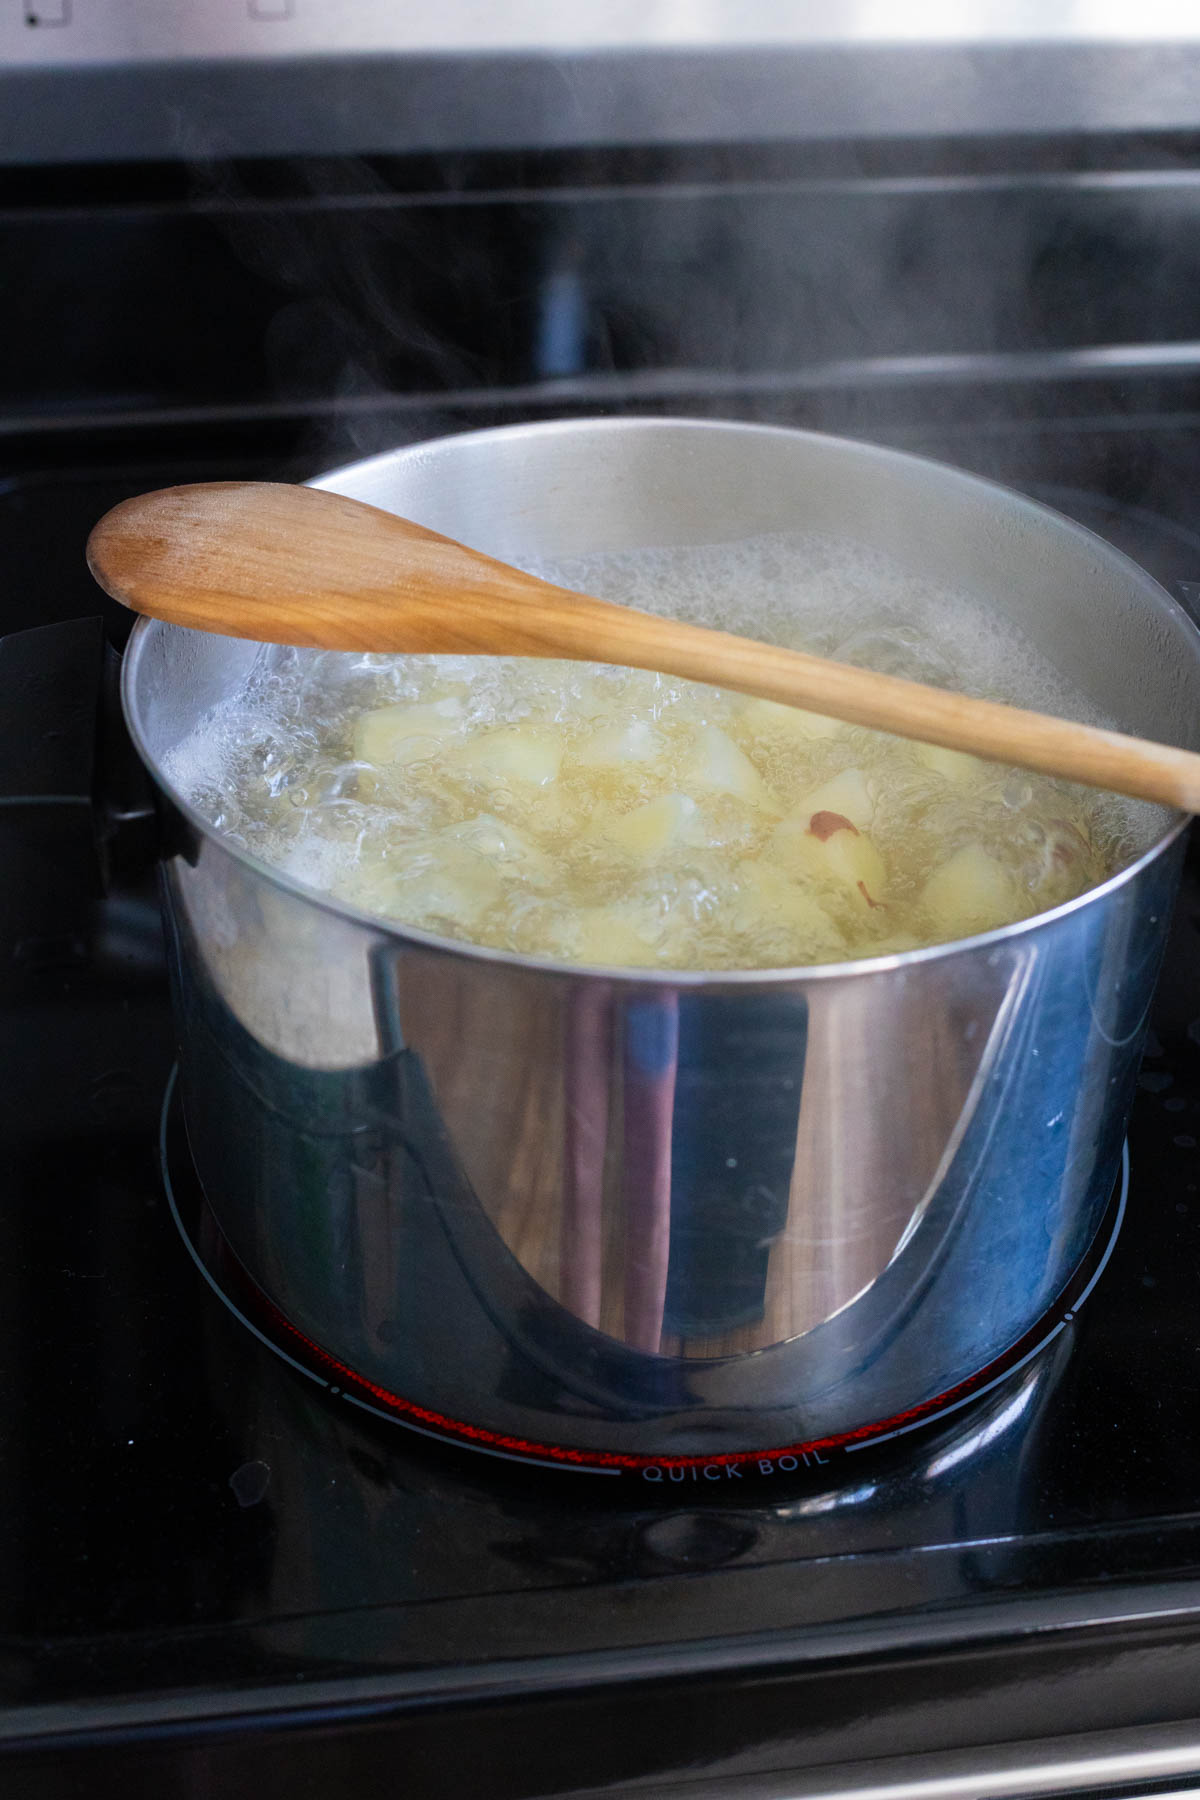 The potatoes are in a large pot of boiling water with a wooden spoon over the top.